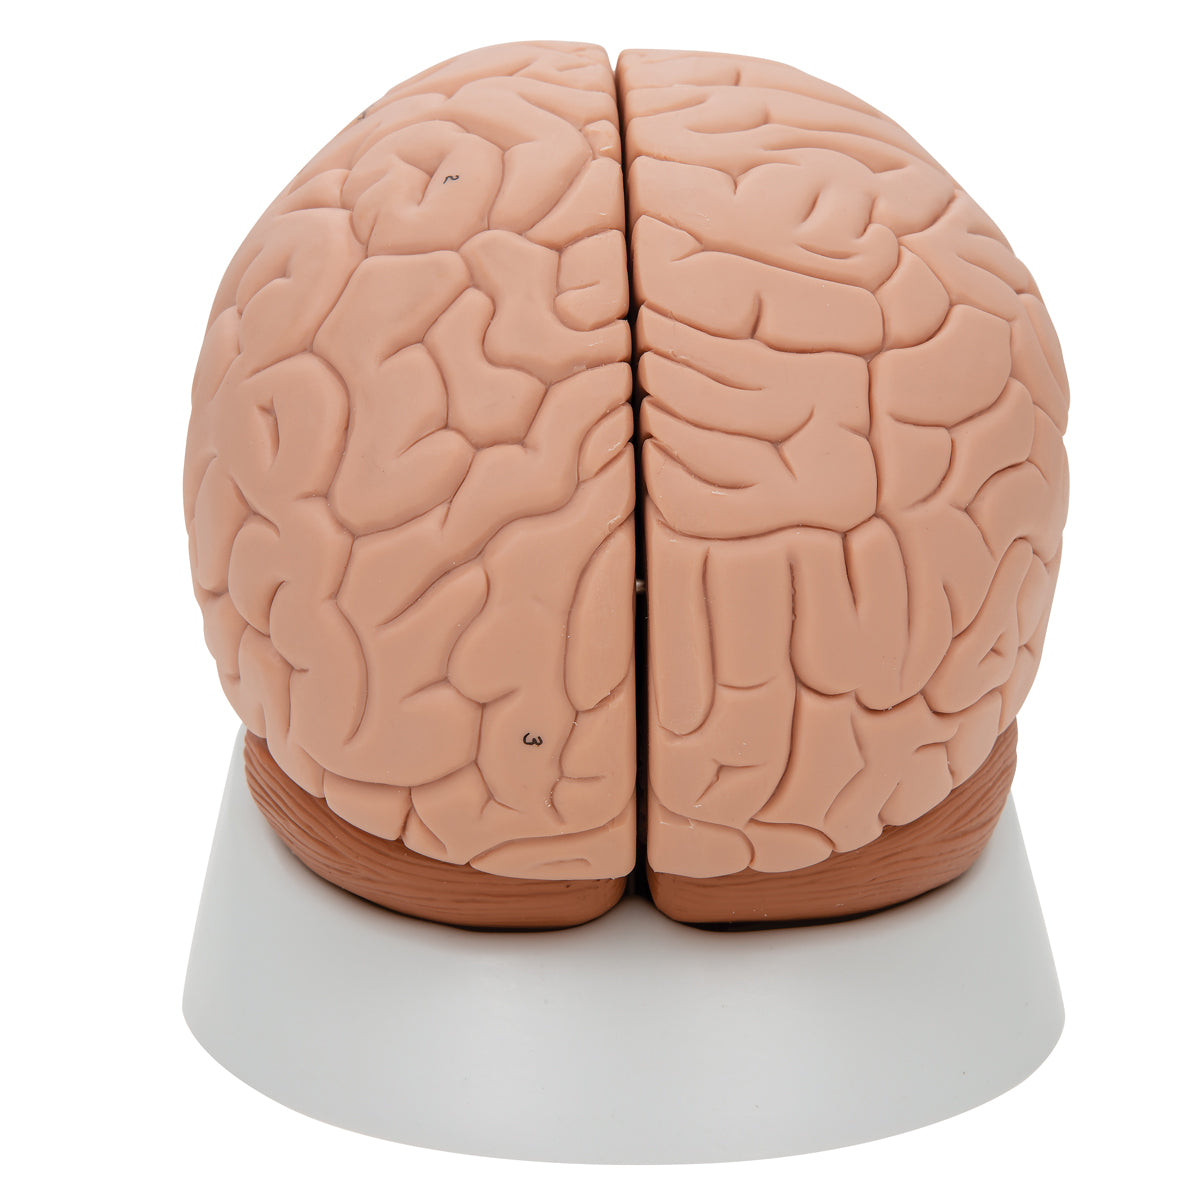 Anatomical brain model in 2 parts 